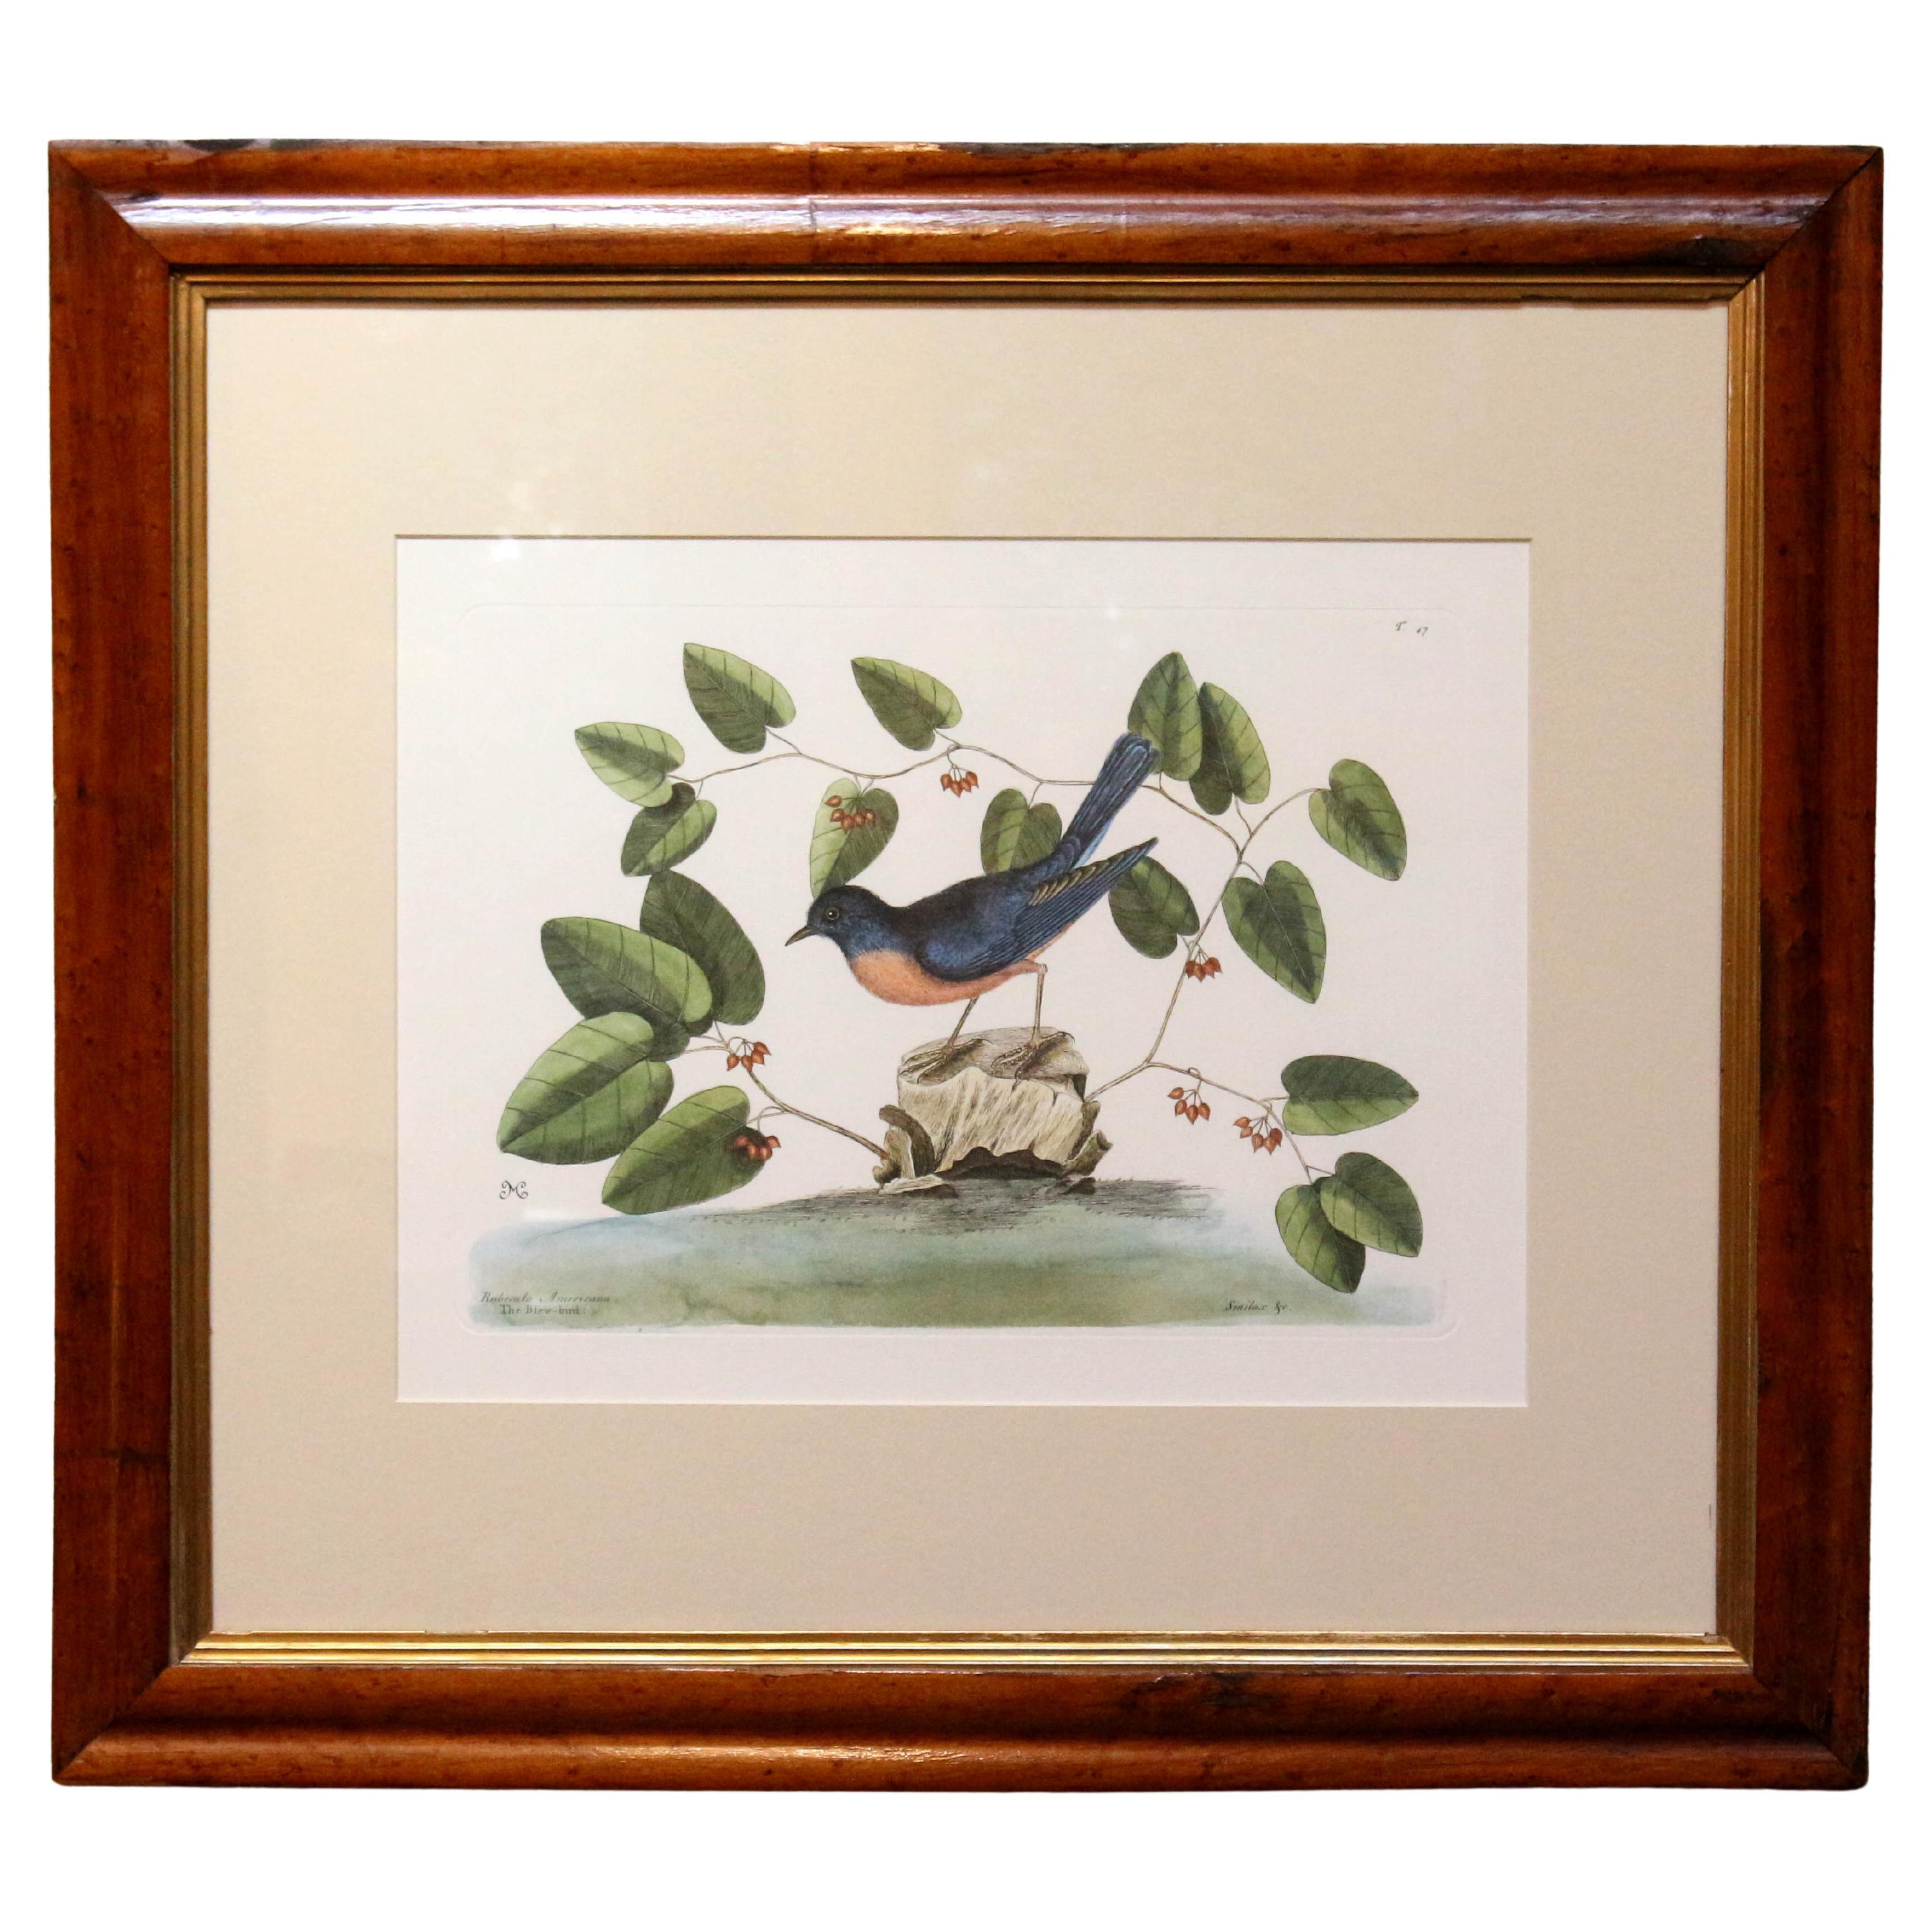 20th Century "The Blew-bird" Print, Copy of the Engraving by Mark Catesby